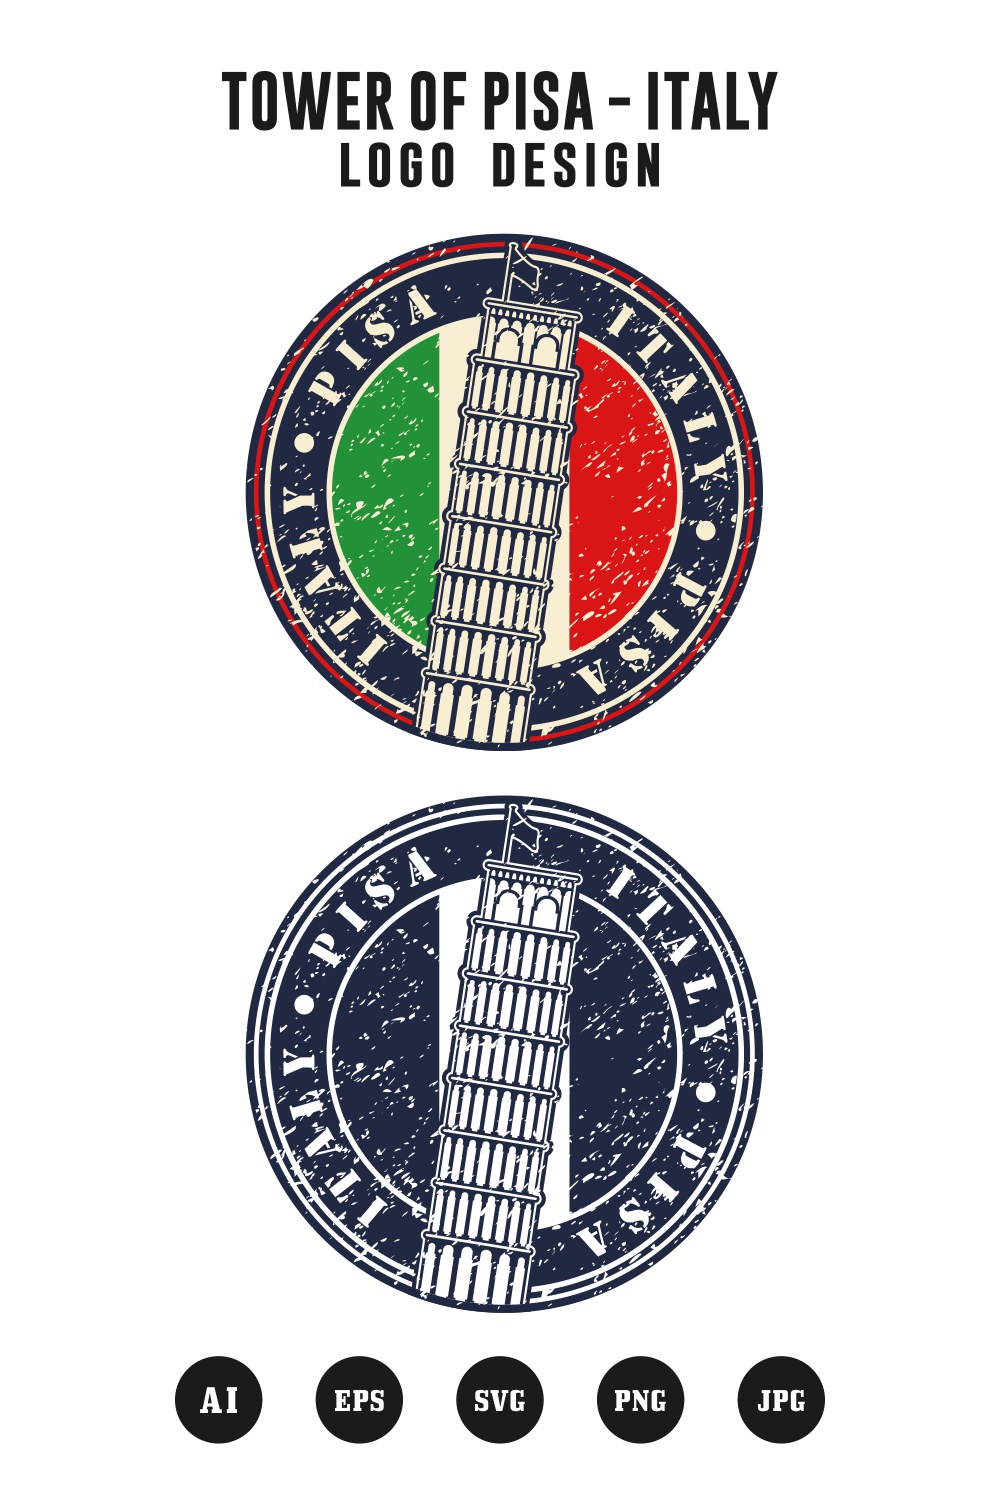 Tower of pisa italy logo design collection - $4 pinterest preview image.